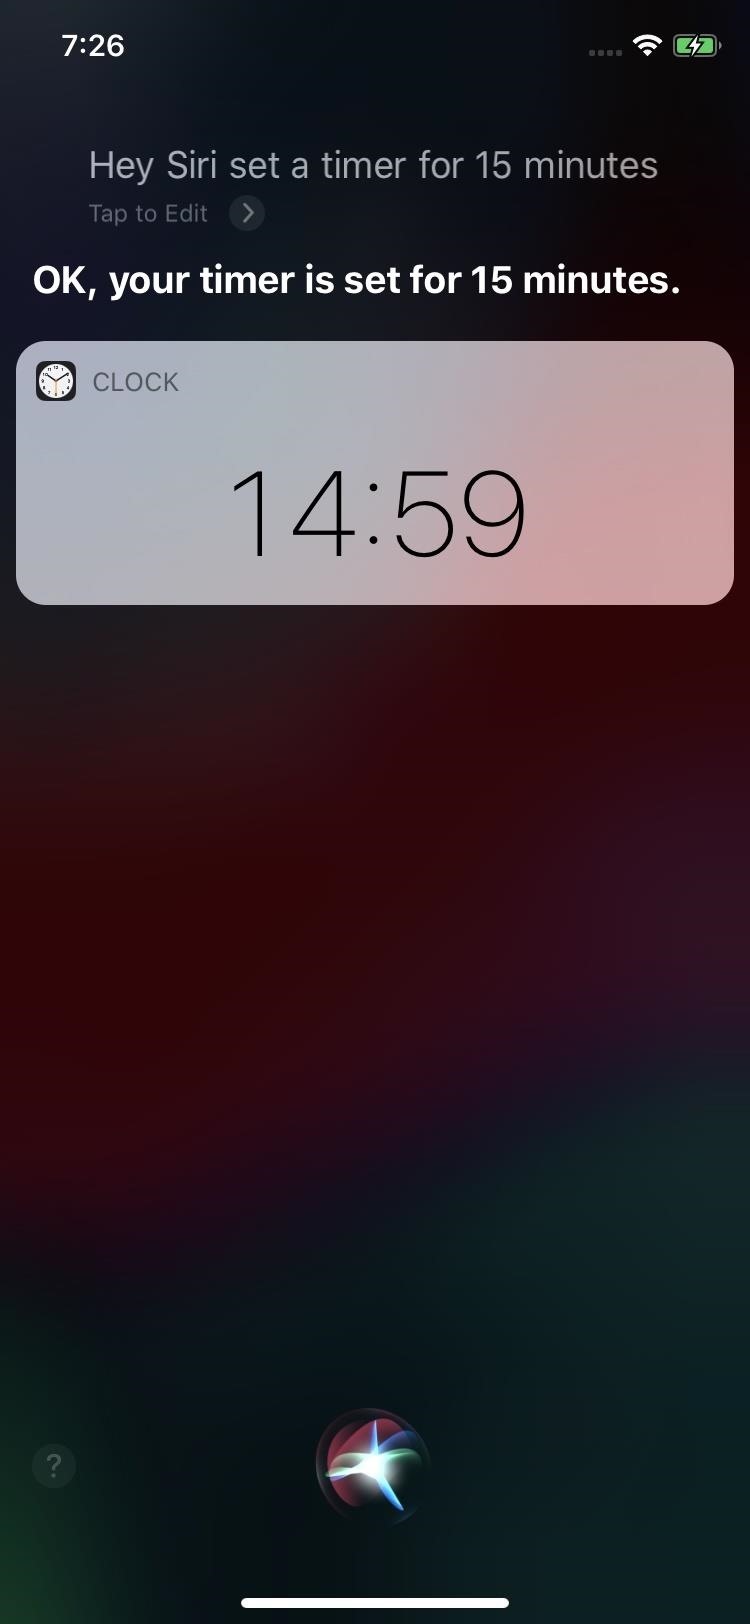 Siri to stop the music